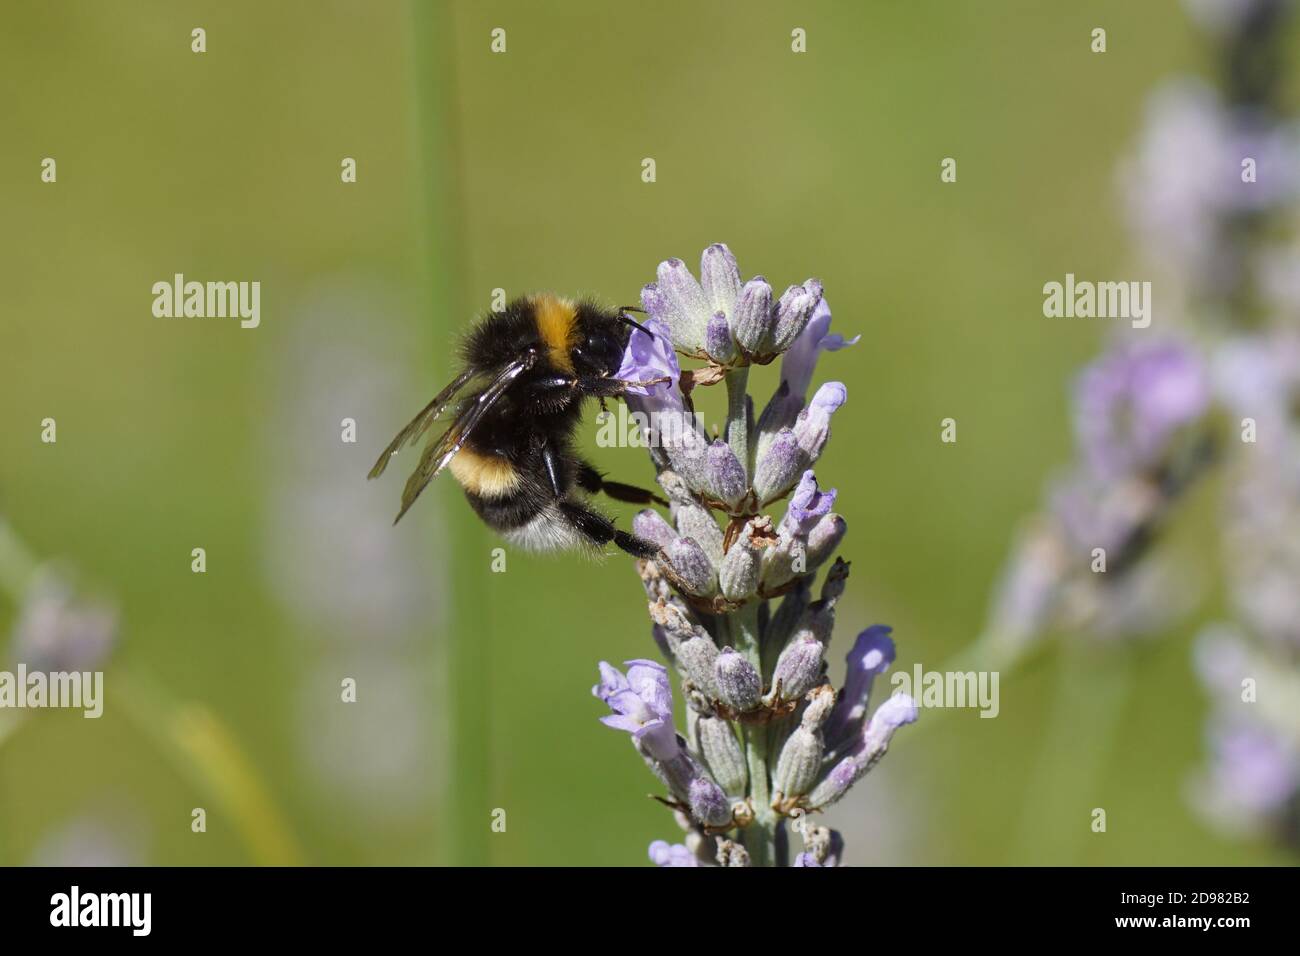 Bumblebee species in the Bombus terrestris-complex, family apidae on flowers of lavender (Lavandula), family Lamiaceae in a Dutch garden. Netherlands, Stock Photo